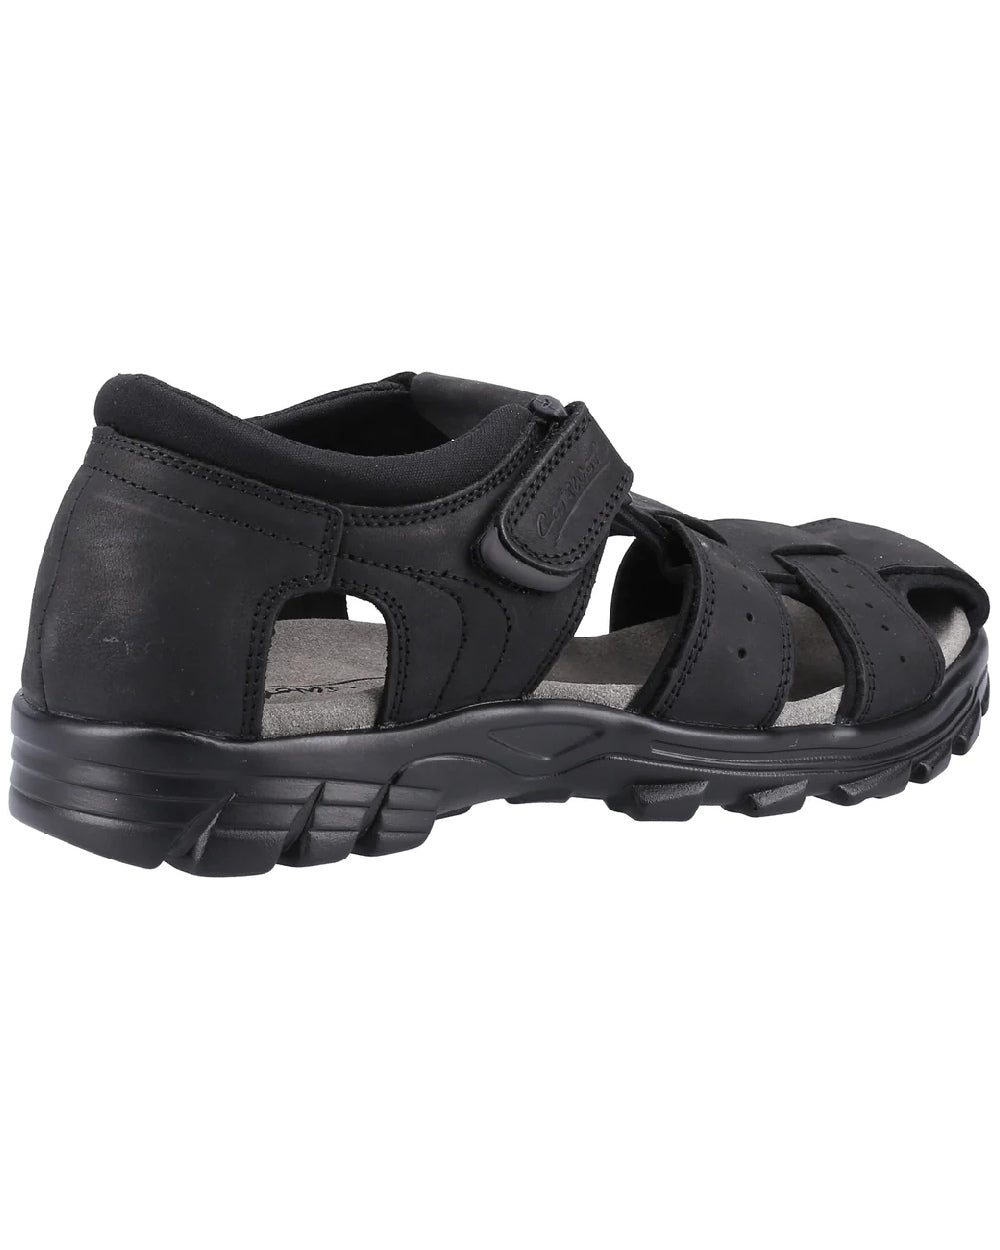 Cotswold Phil Sandals in Black 